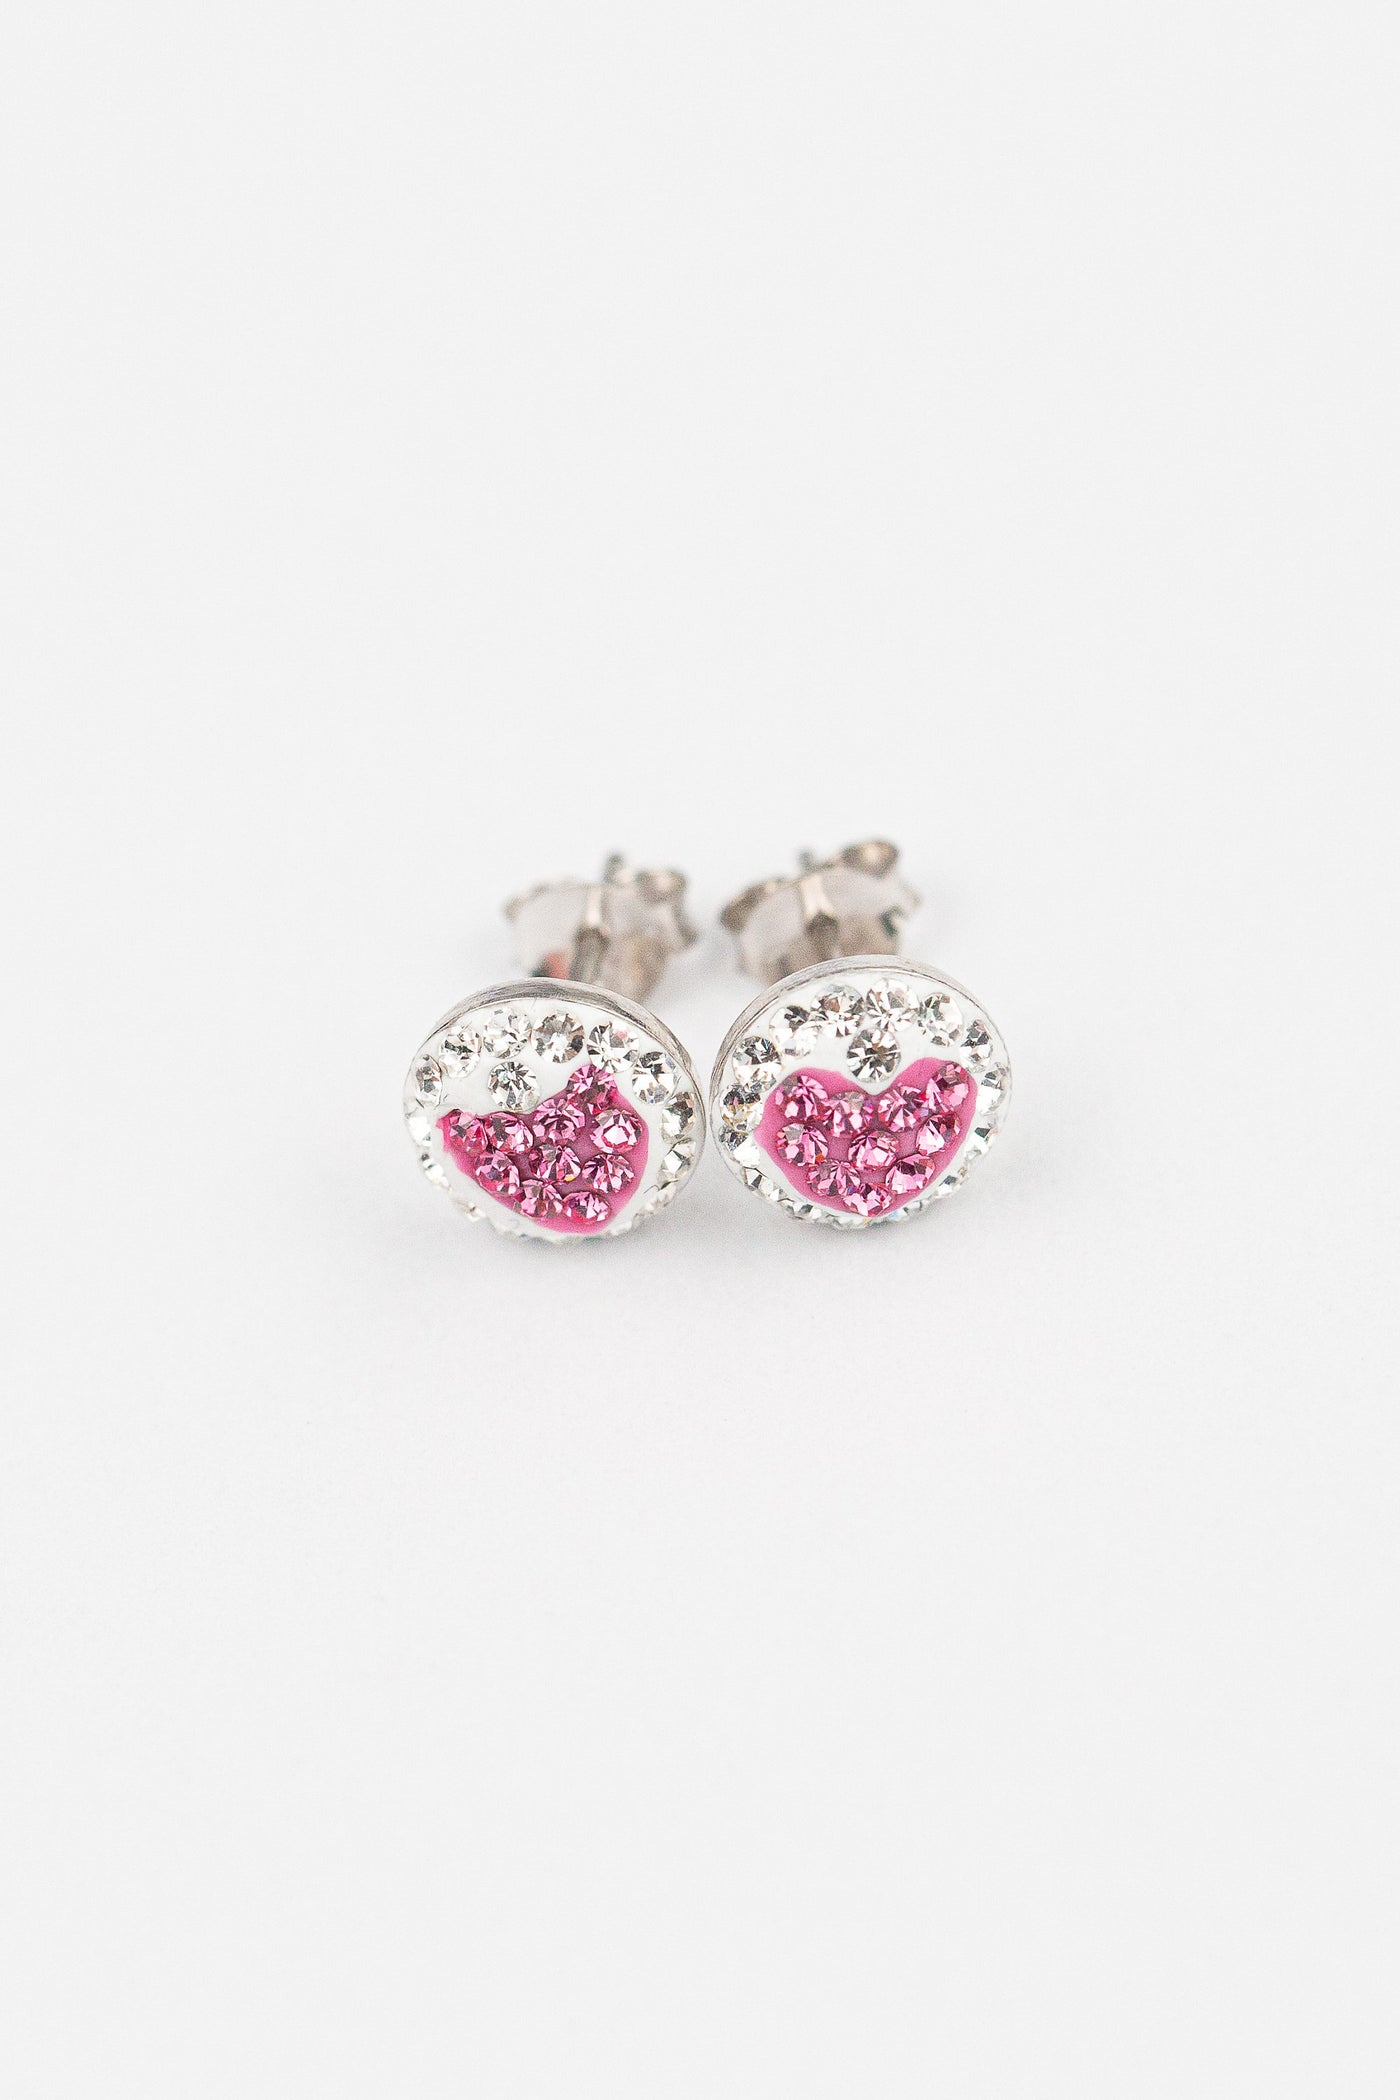 8mm Round Crystal Heart Stud Silver Earrings in Pink | Annie and Sisters | sister stud earrings, for kids, children's jewelry, kid's jewelry, best friend